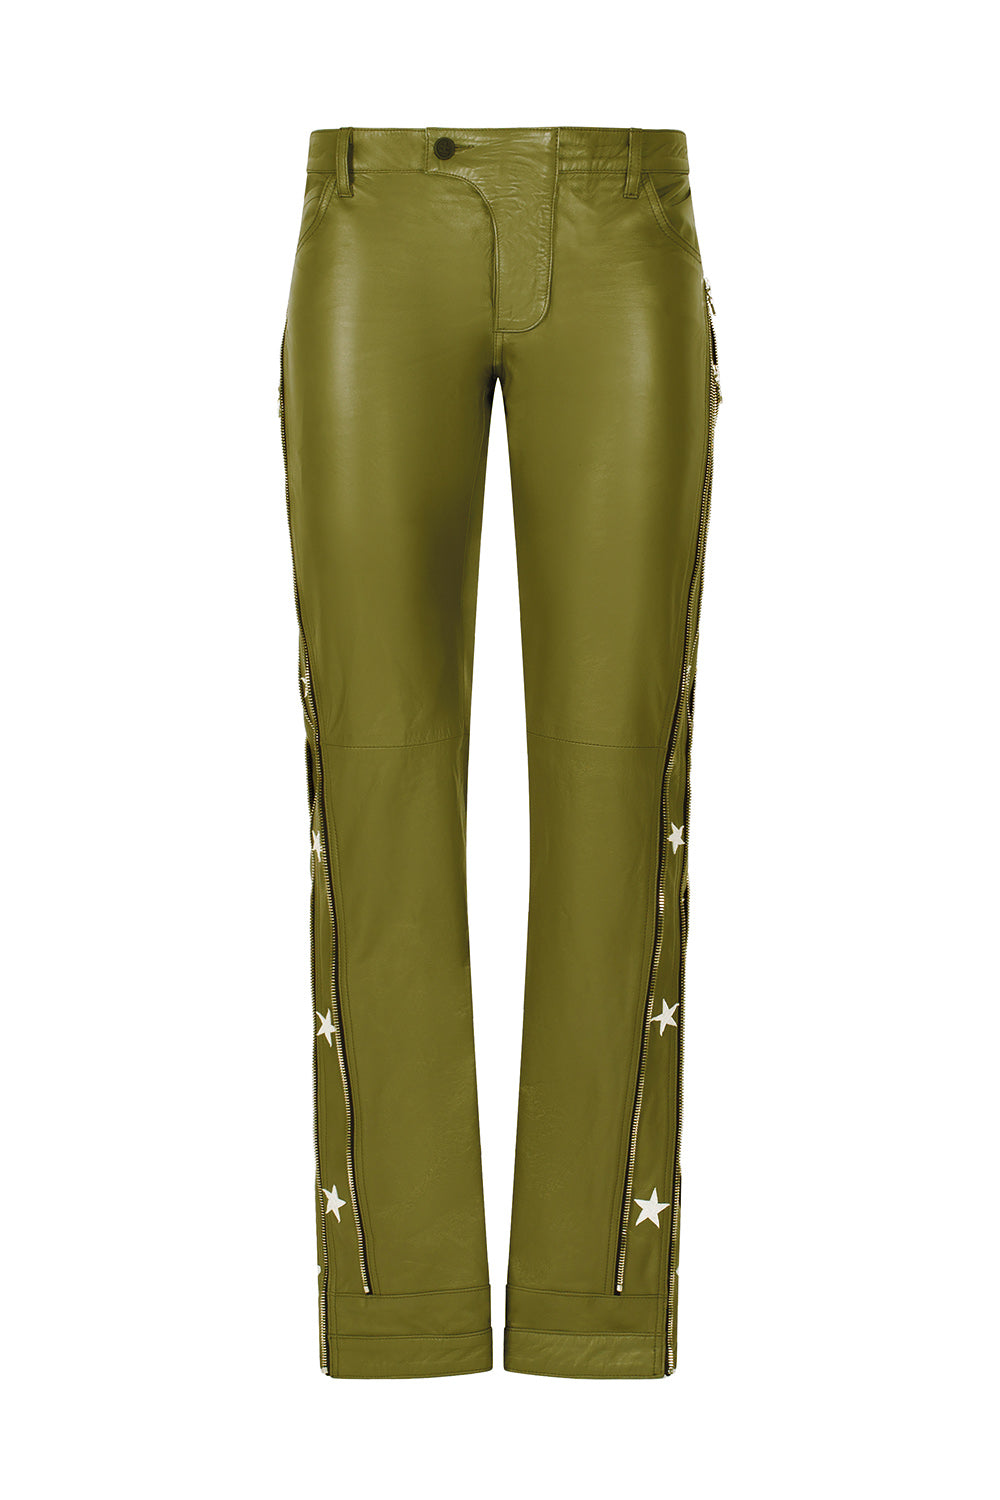 SUNSET RODEO LEATHER PANTS-OLIVE